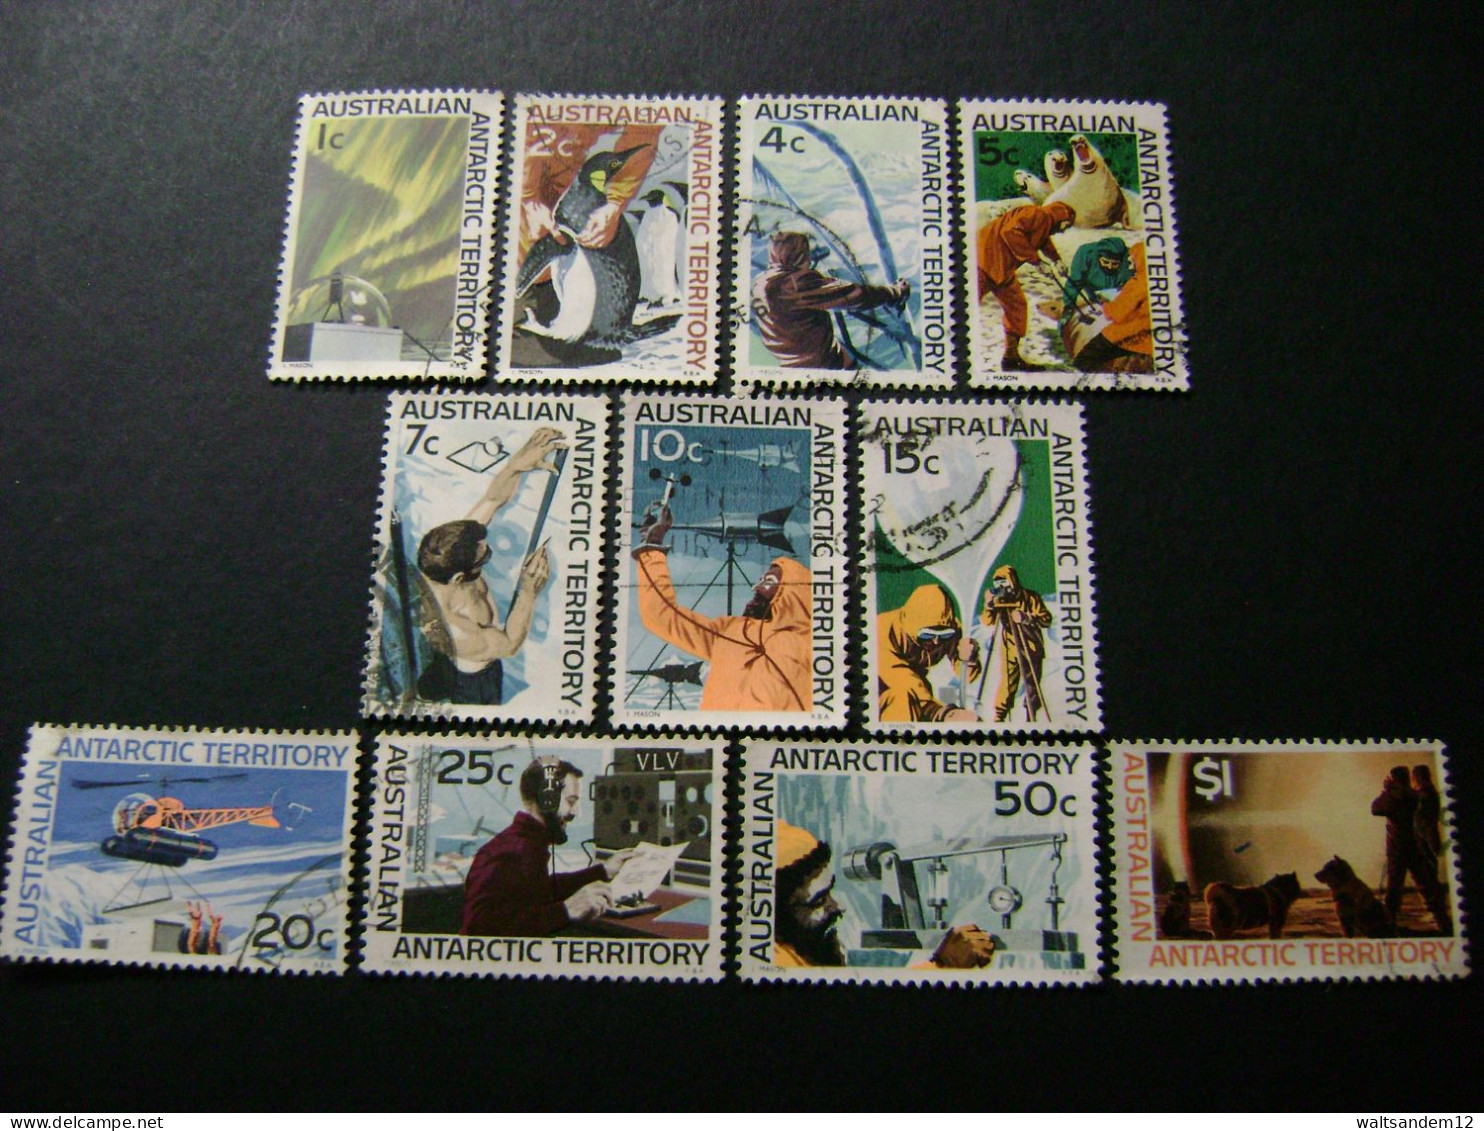 Australian Antarctic Territory 1967-1968 Decimal Currency Definitive Stamps Set Of 11 (SG 8-18) - Used - Used Stamps